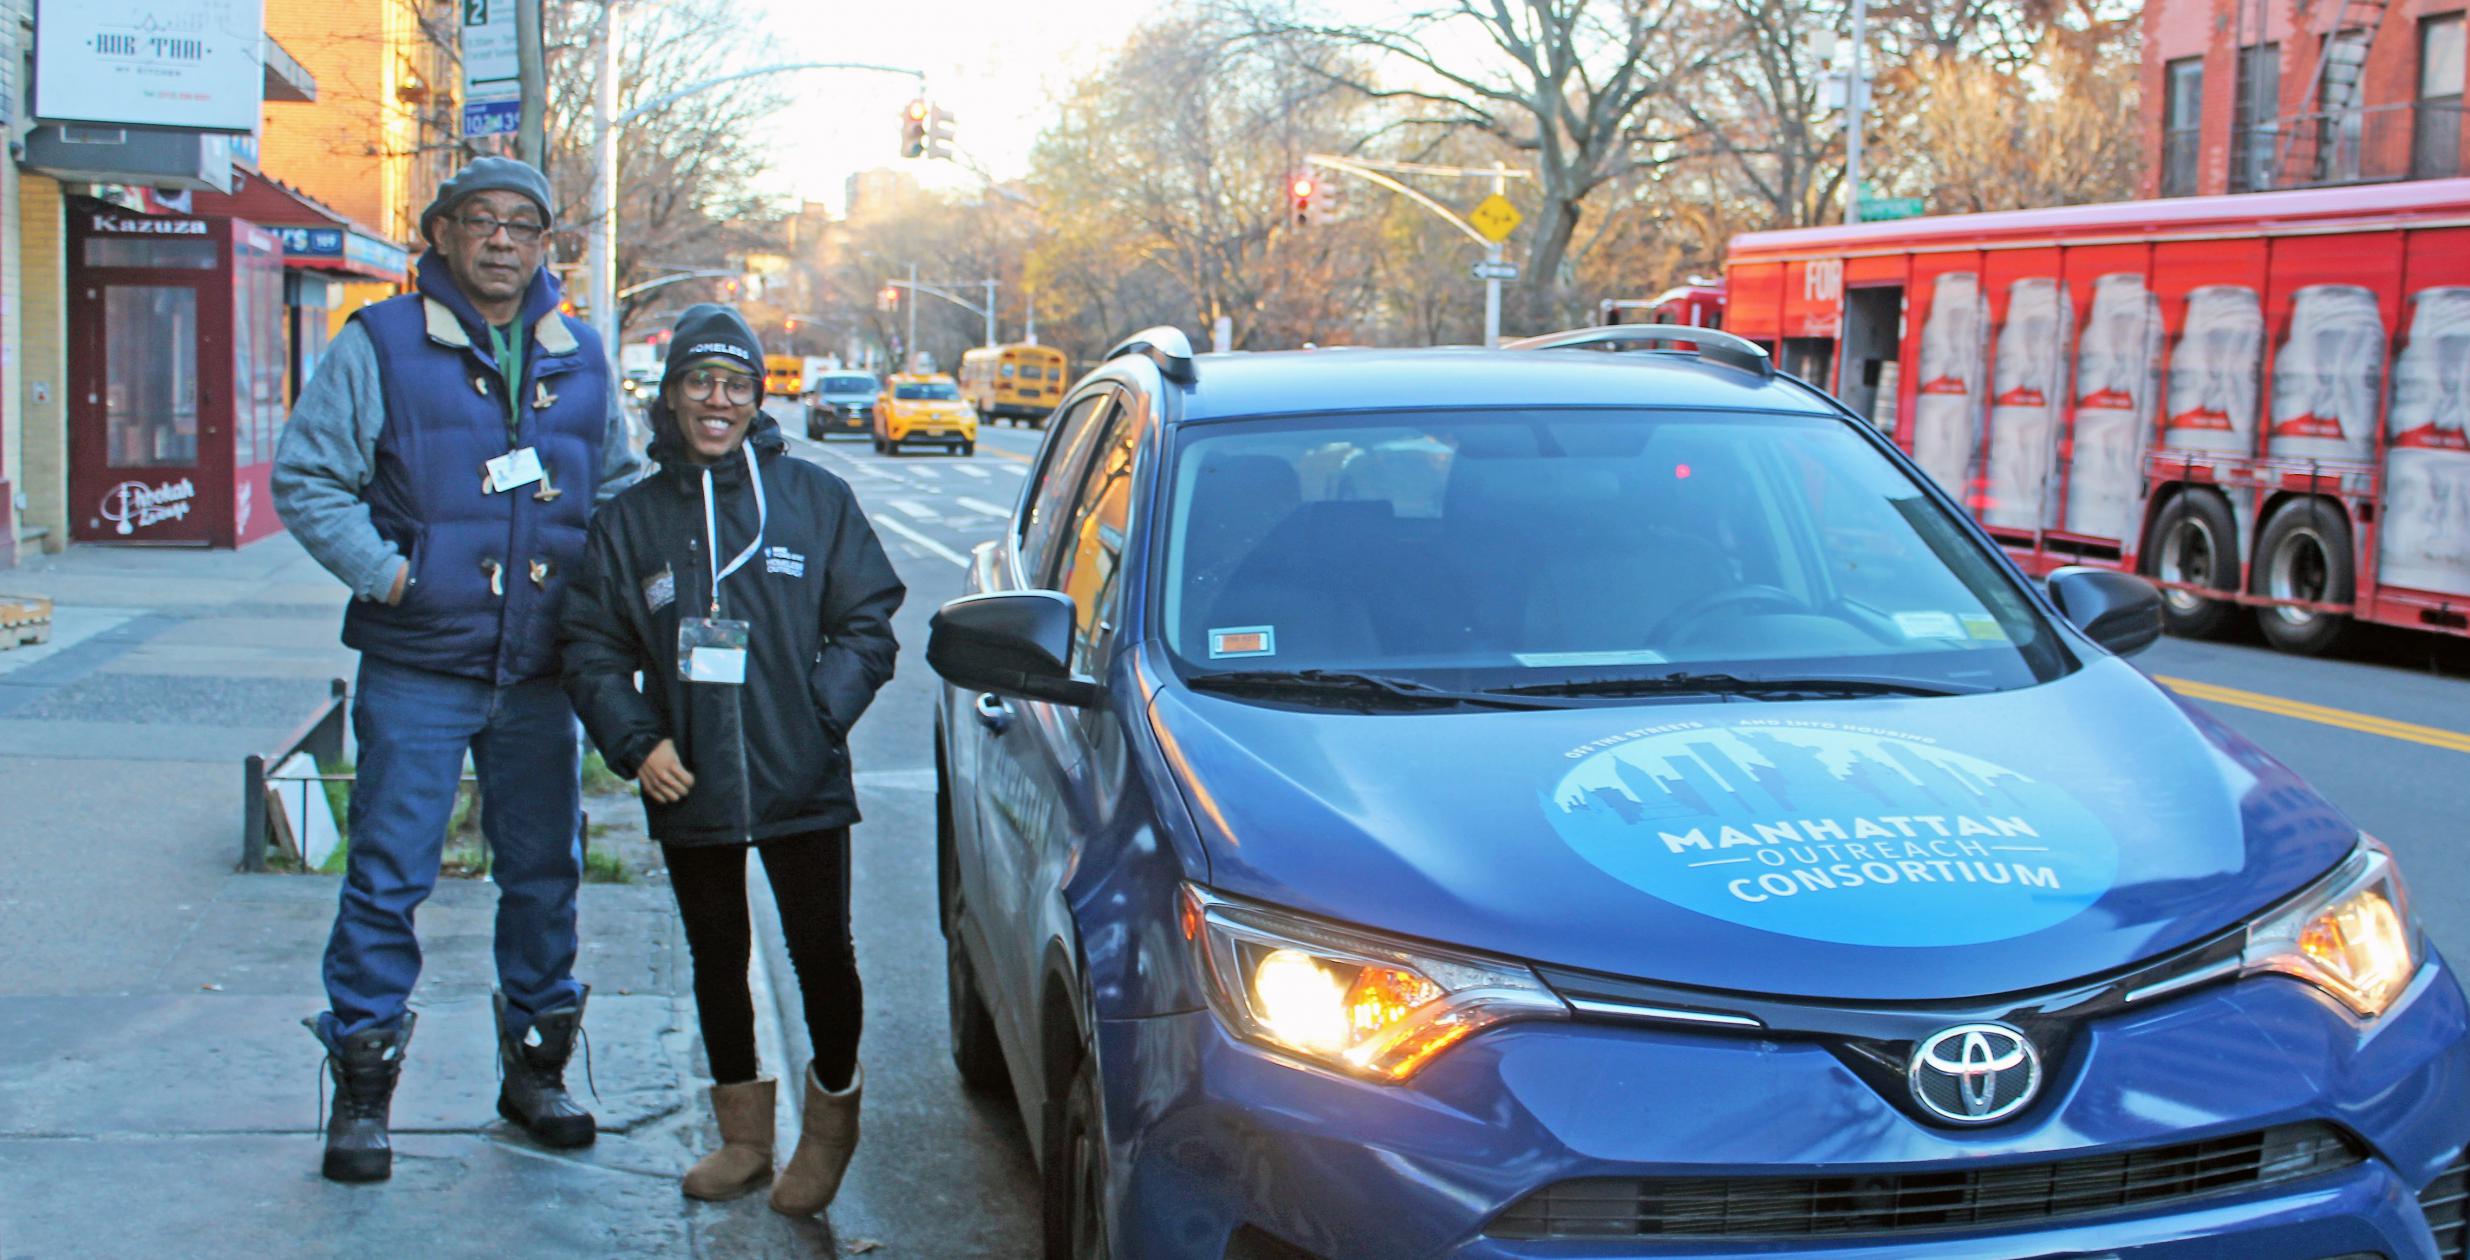 Two people dressed for cold weather stand next to a small SUV labeled Manhattan Outreach Consortium as dawn breaks over the city